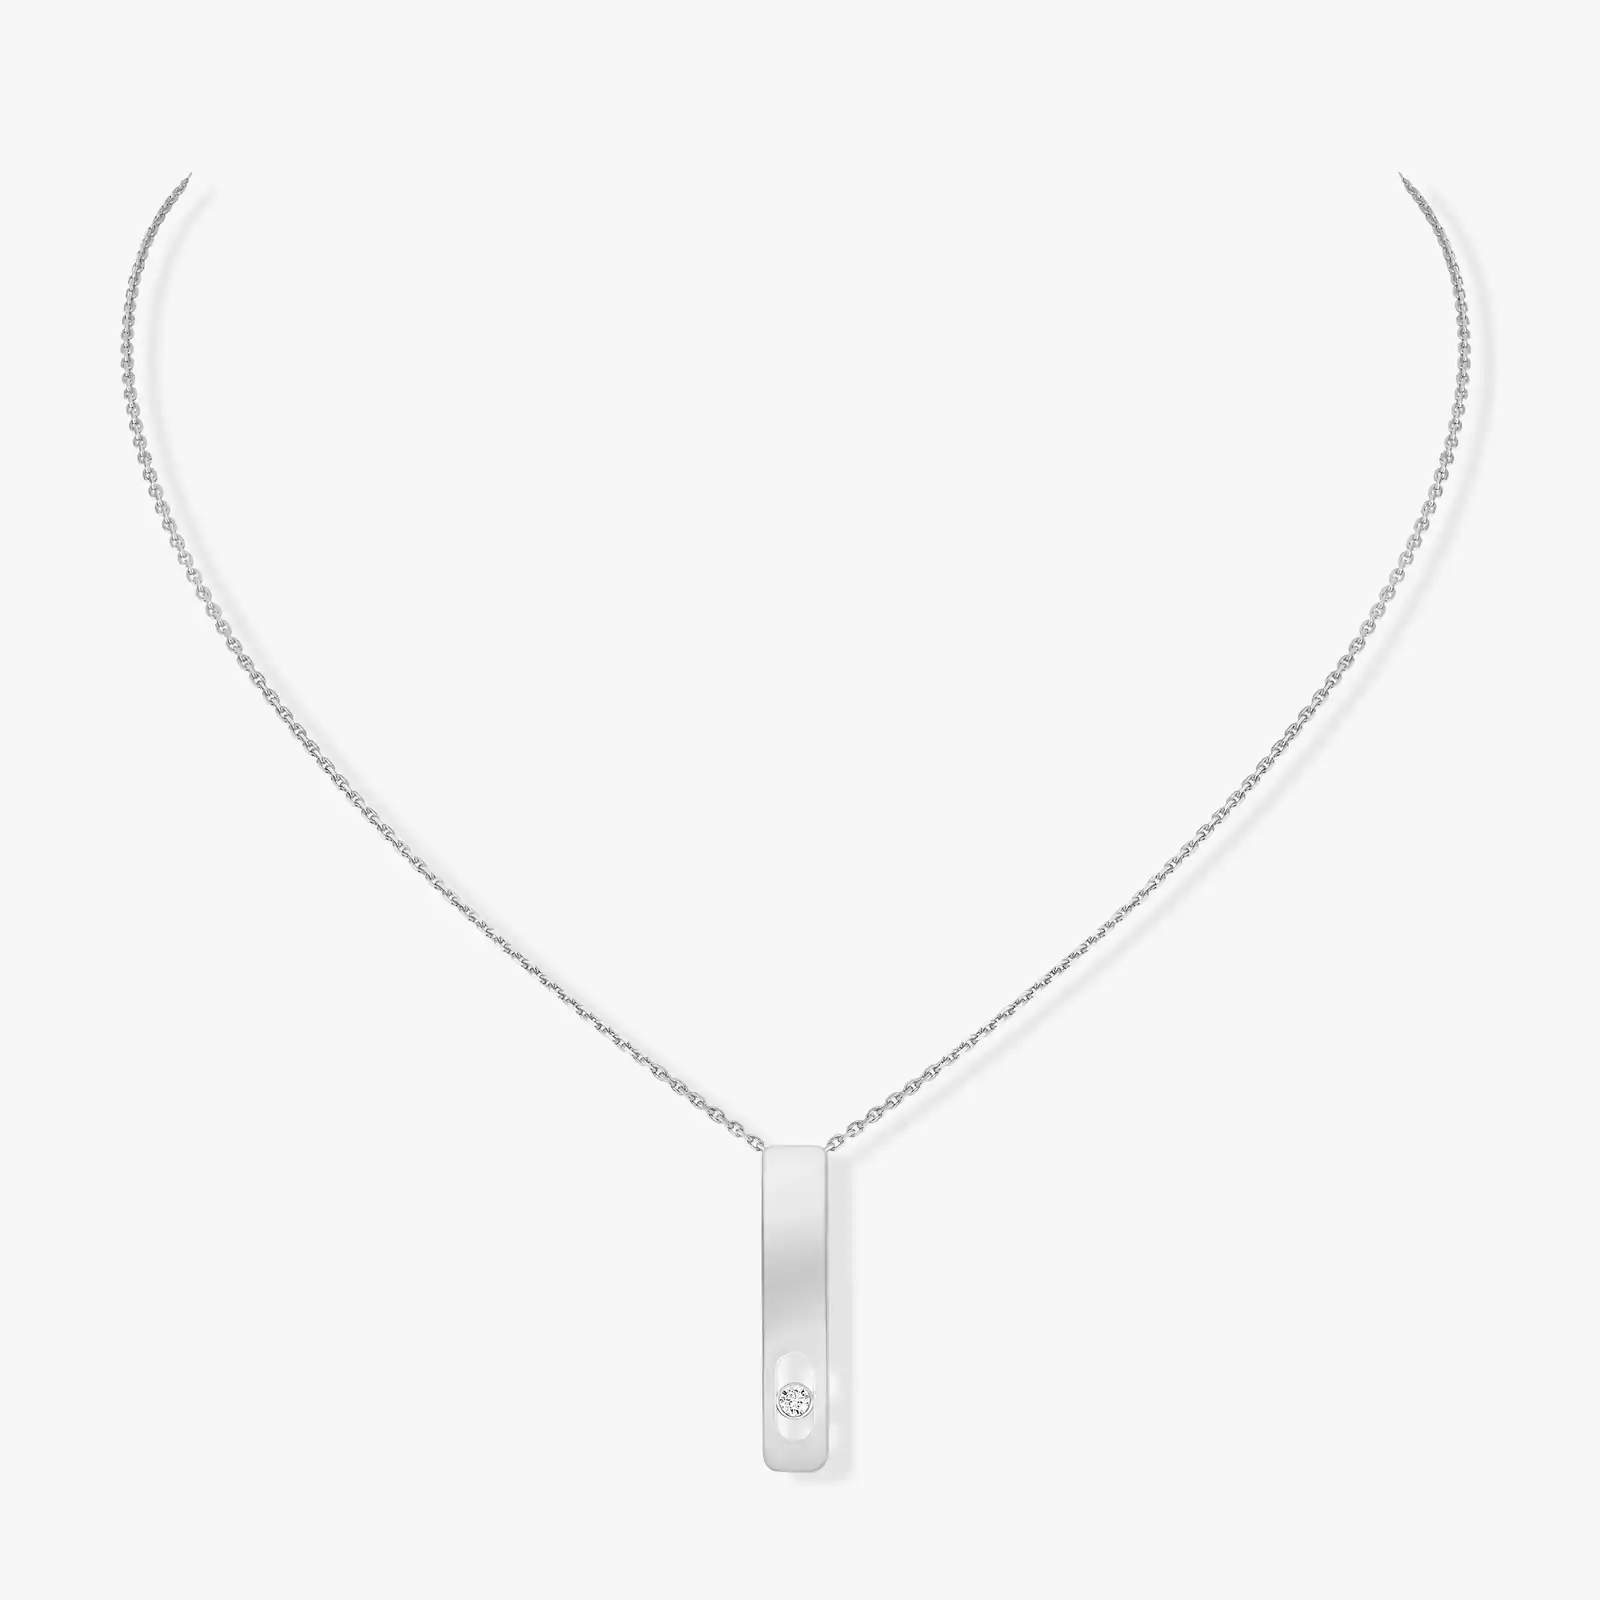 My First Diamond White Gold For Her Diamond Necklace 07498-WG